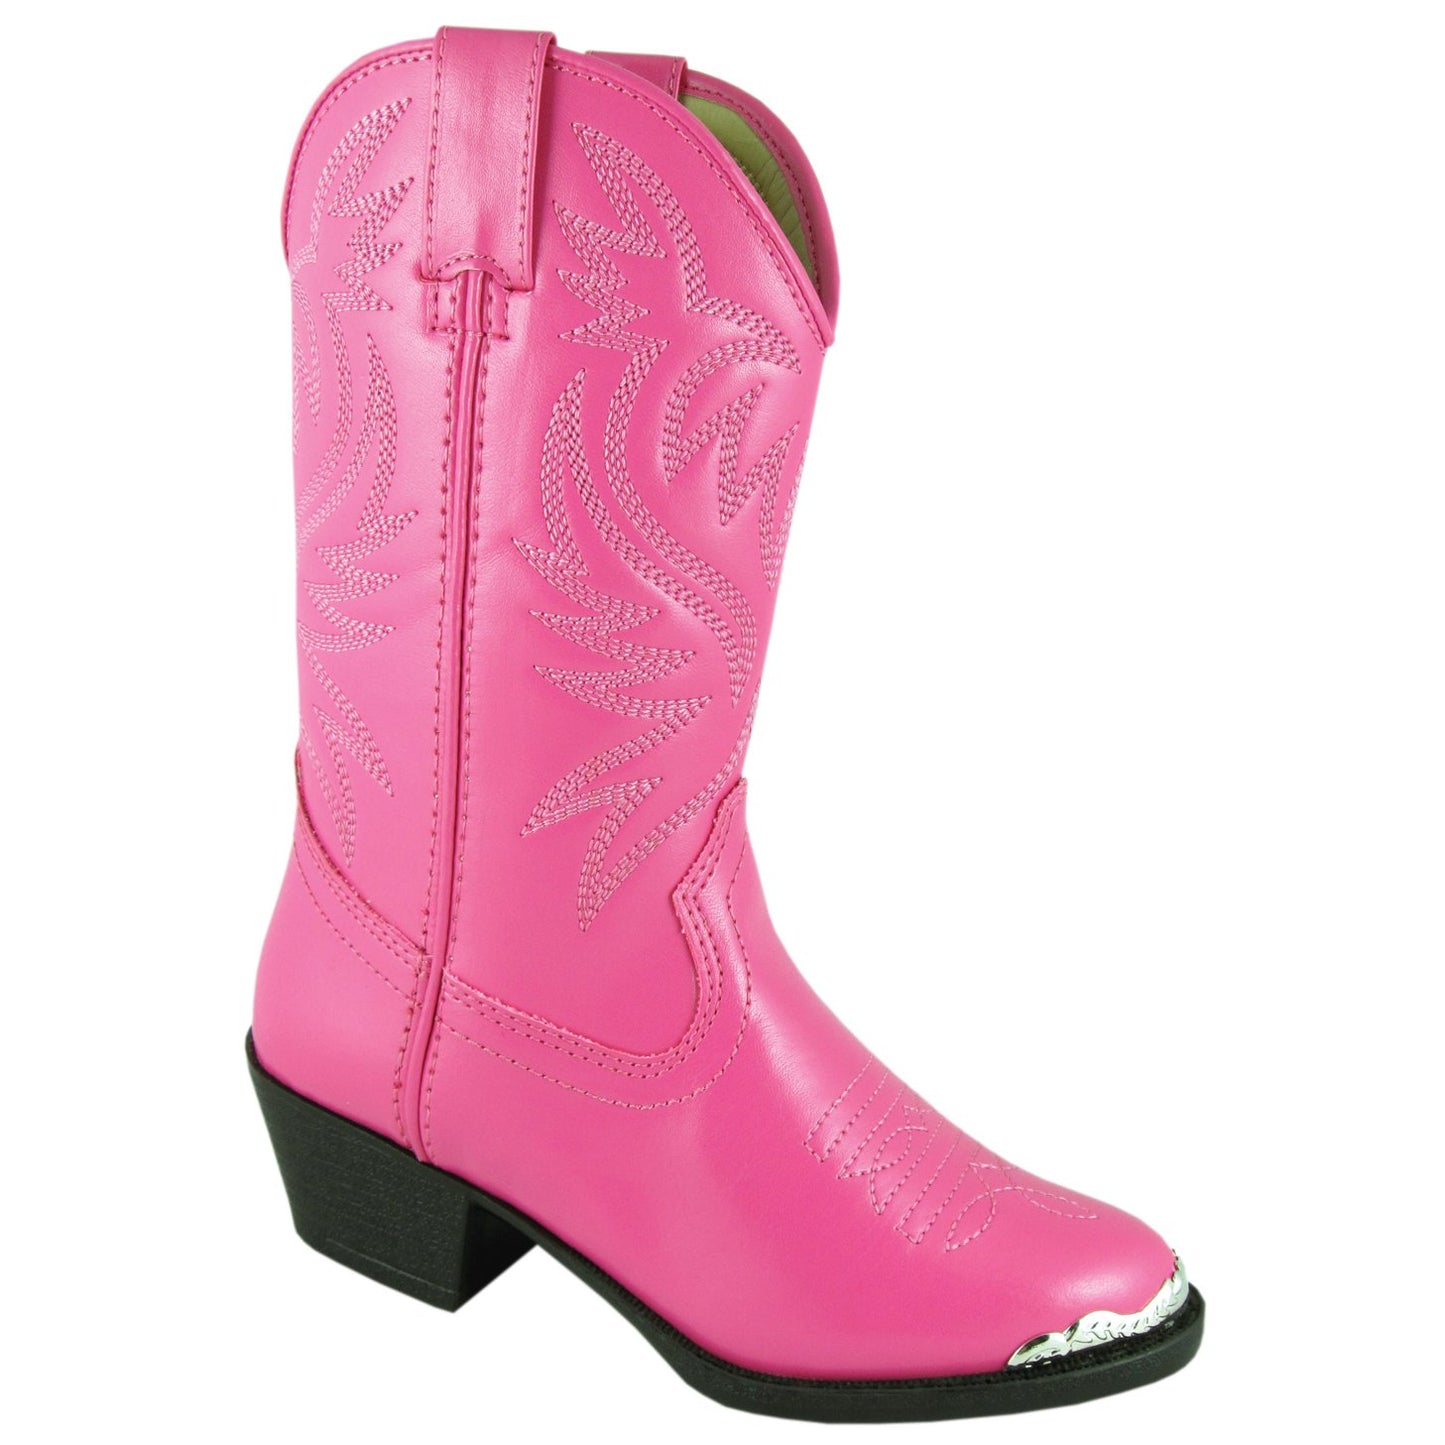 Smoky Mountain Girl's Children's Hot Pink Western Boot